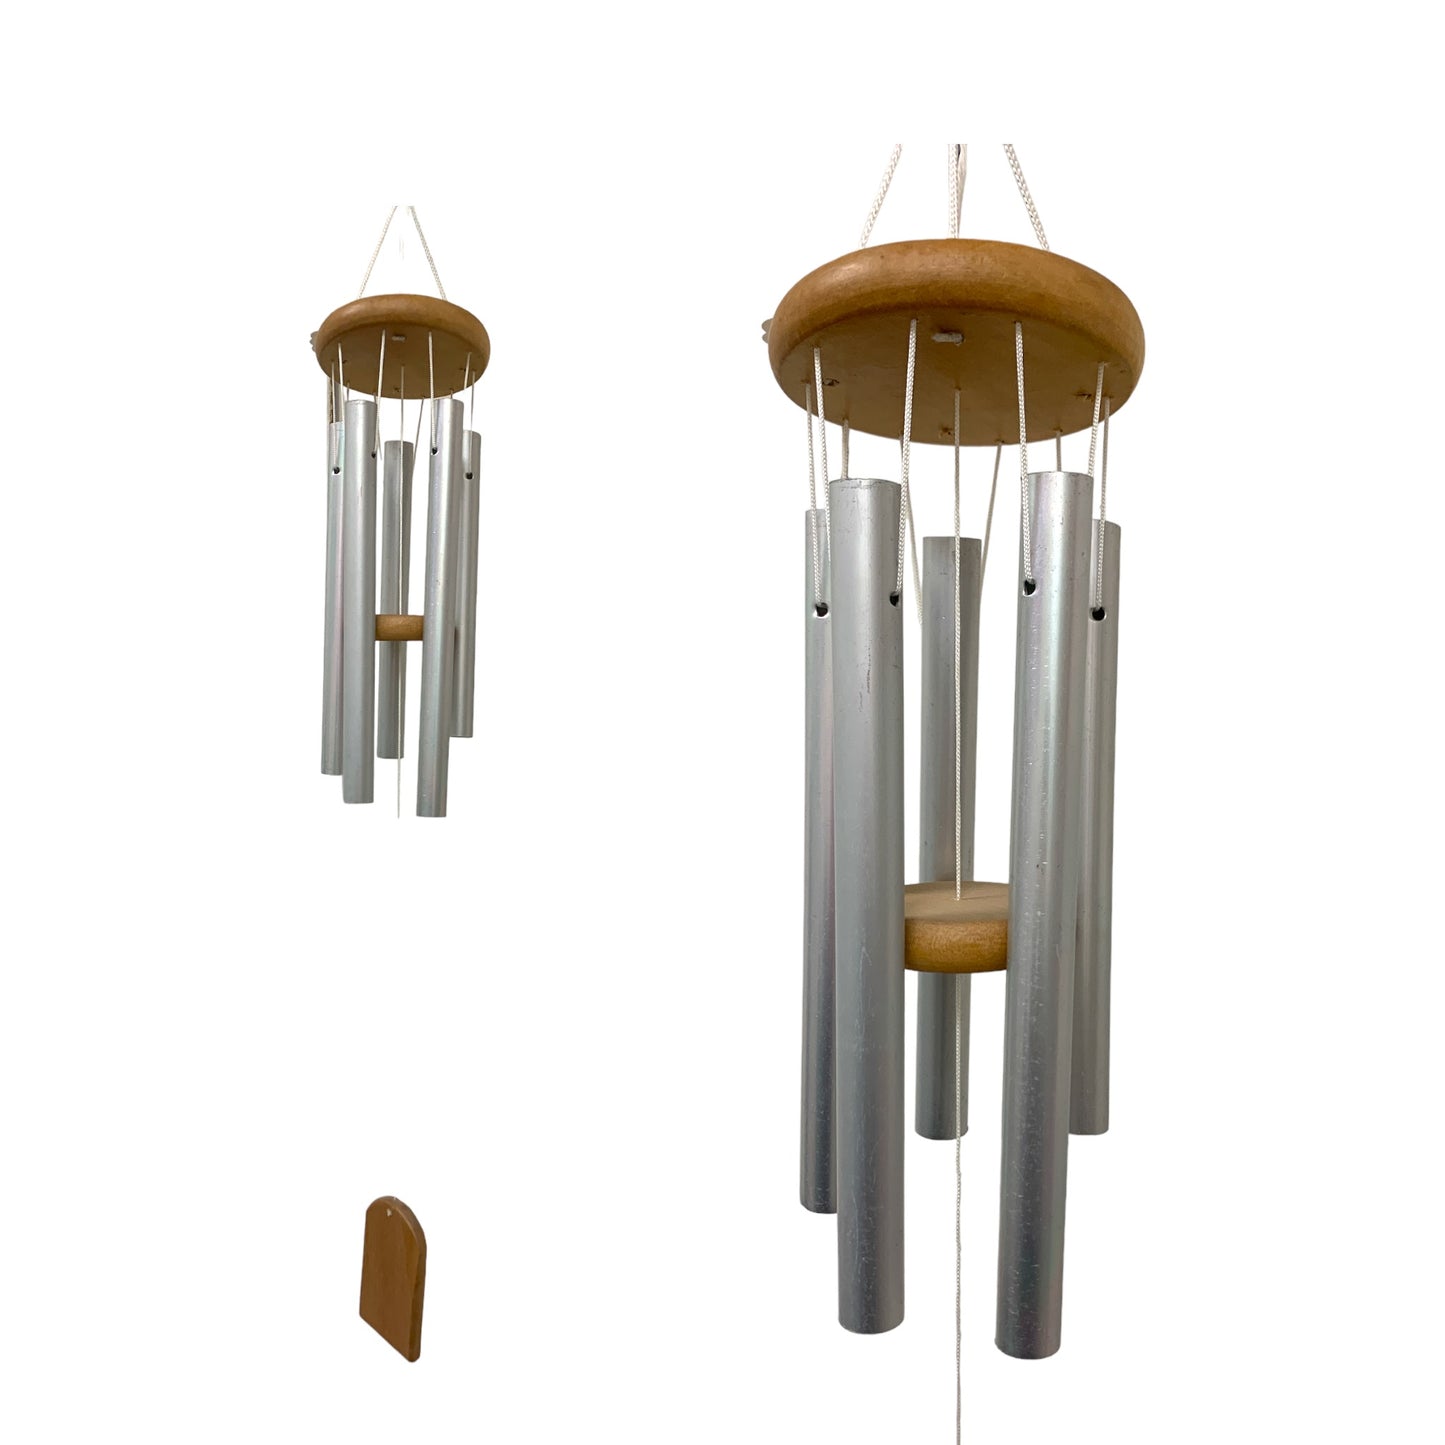 SILVER METAL AND WOOD  - 15 INCH  - MEDIUM WIND CHIME